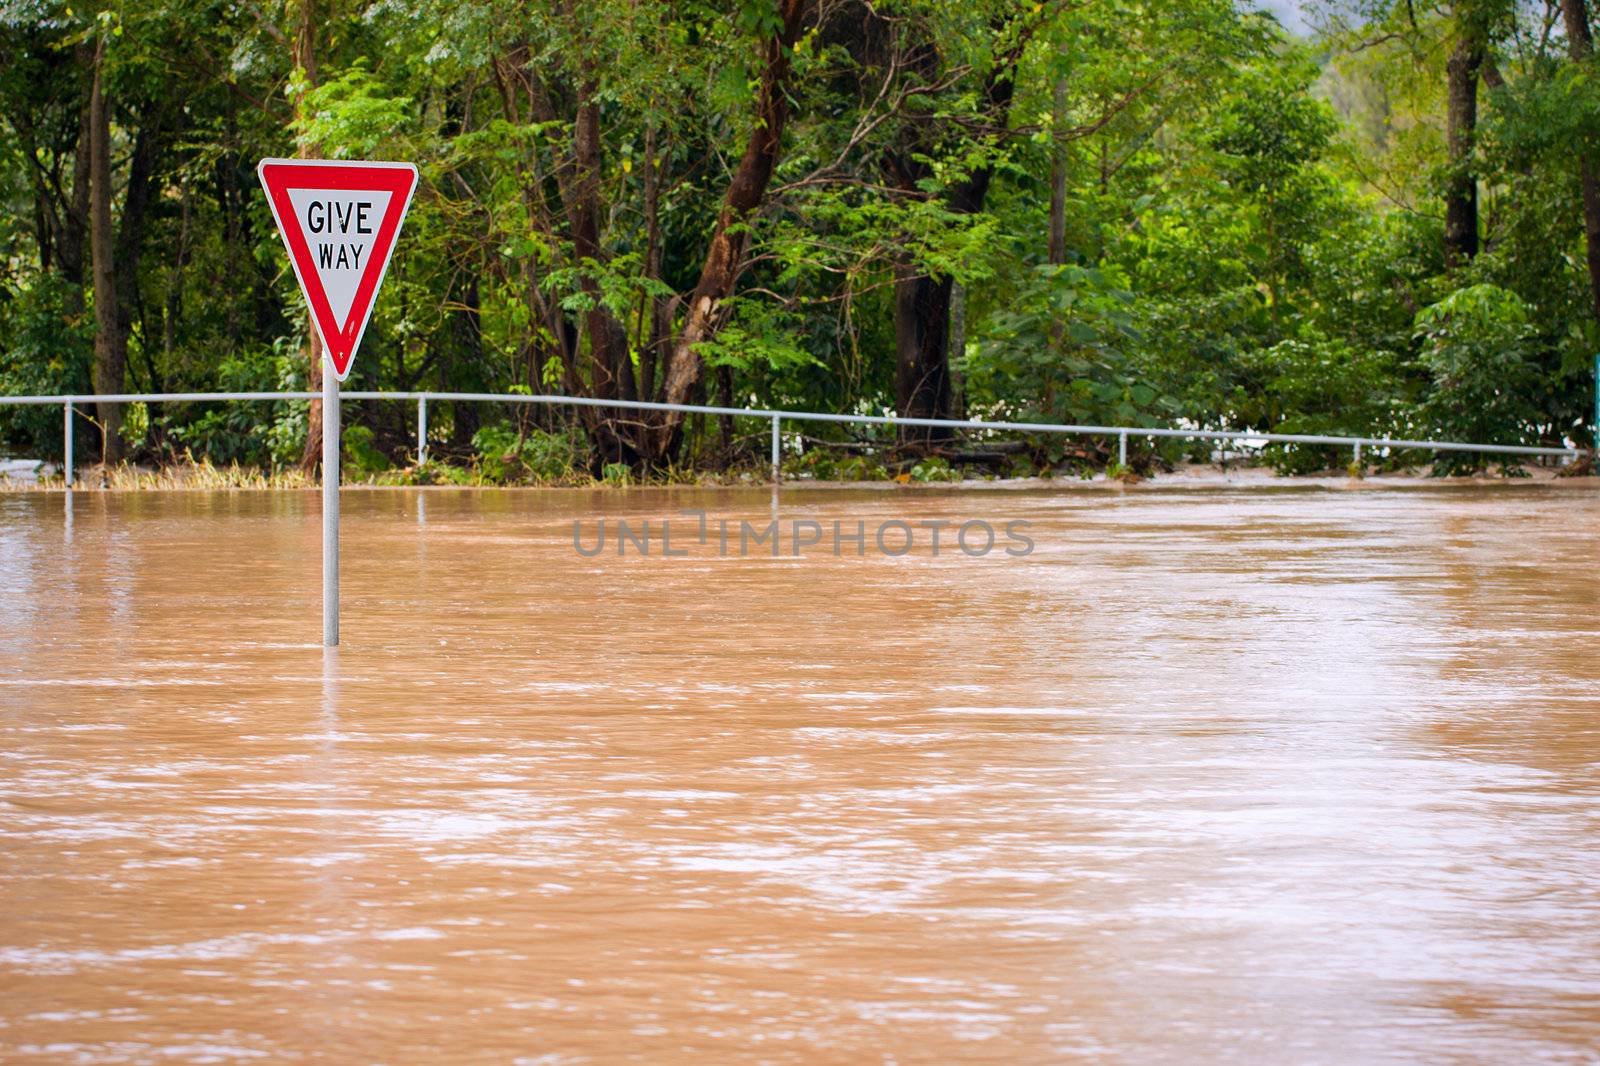 Very flooded road and give way sign by Jaykayl